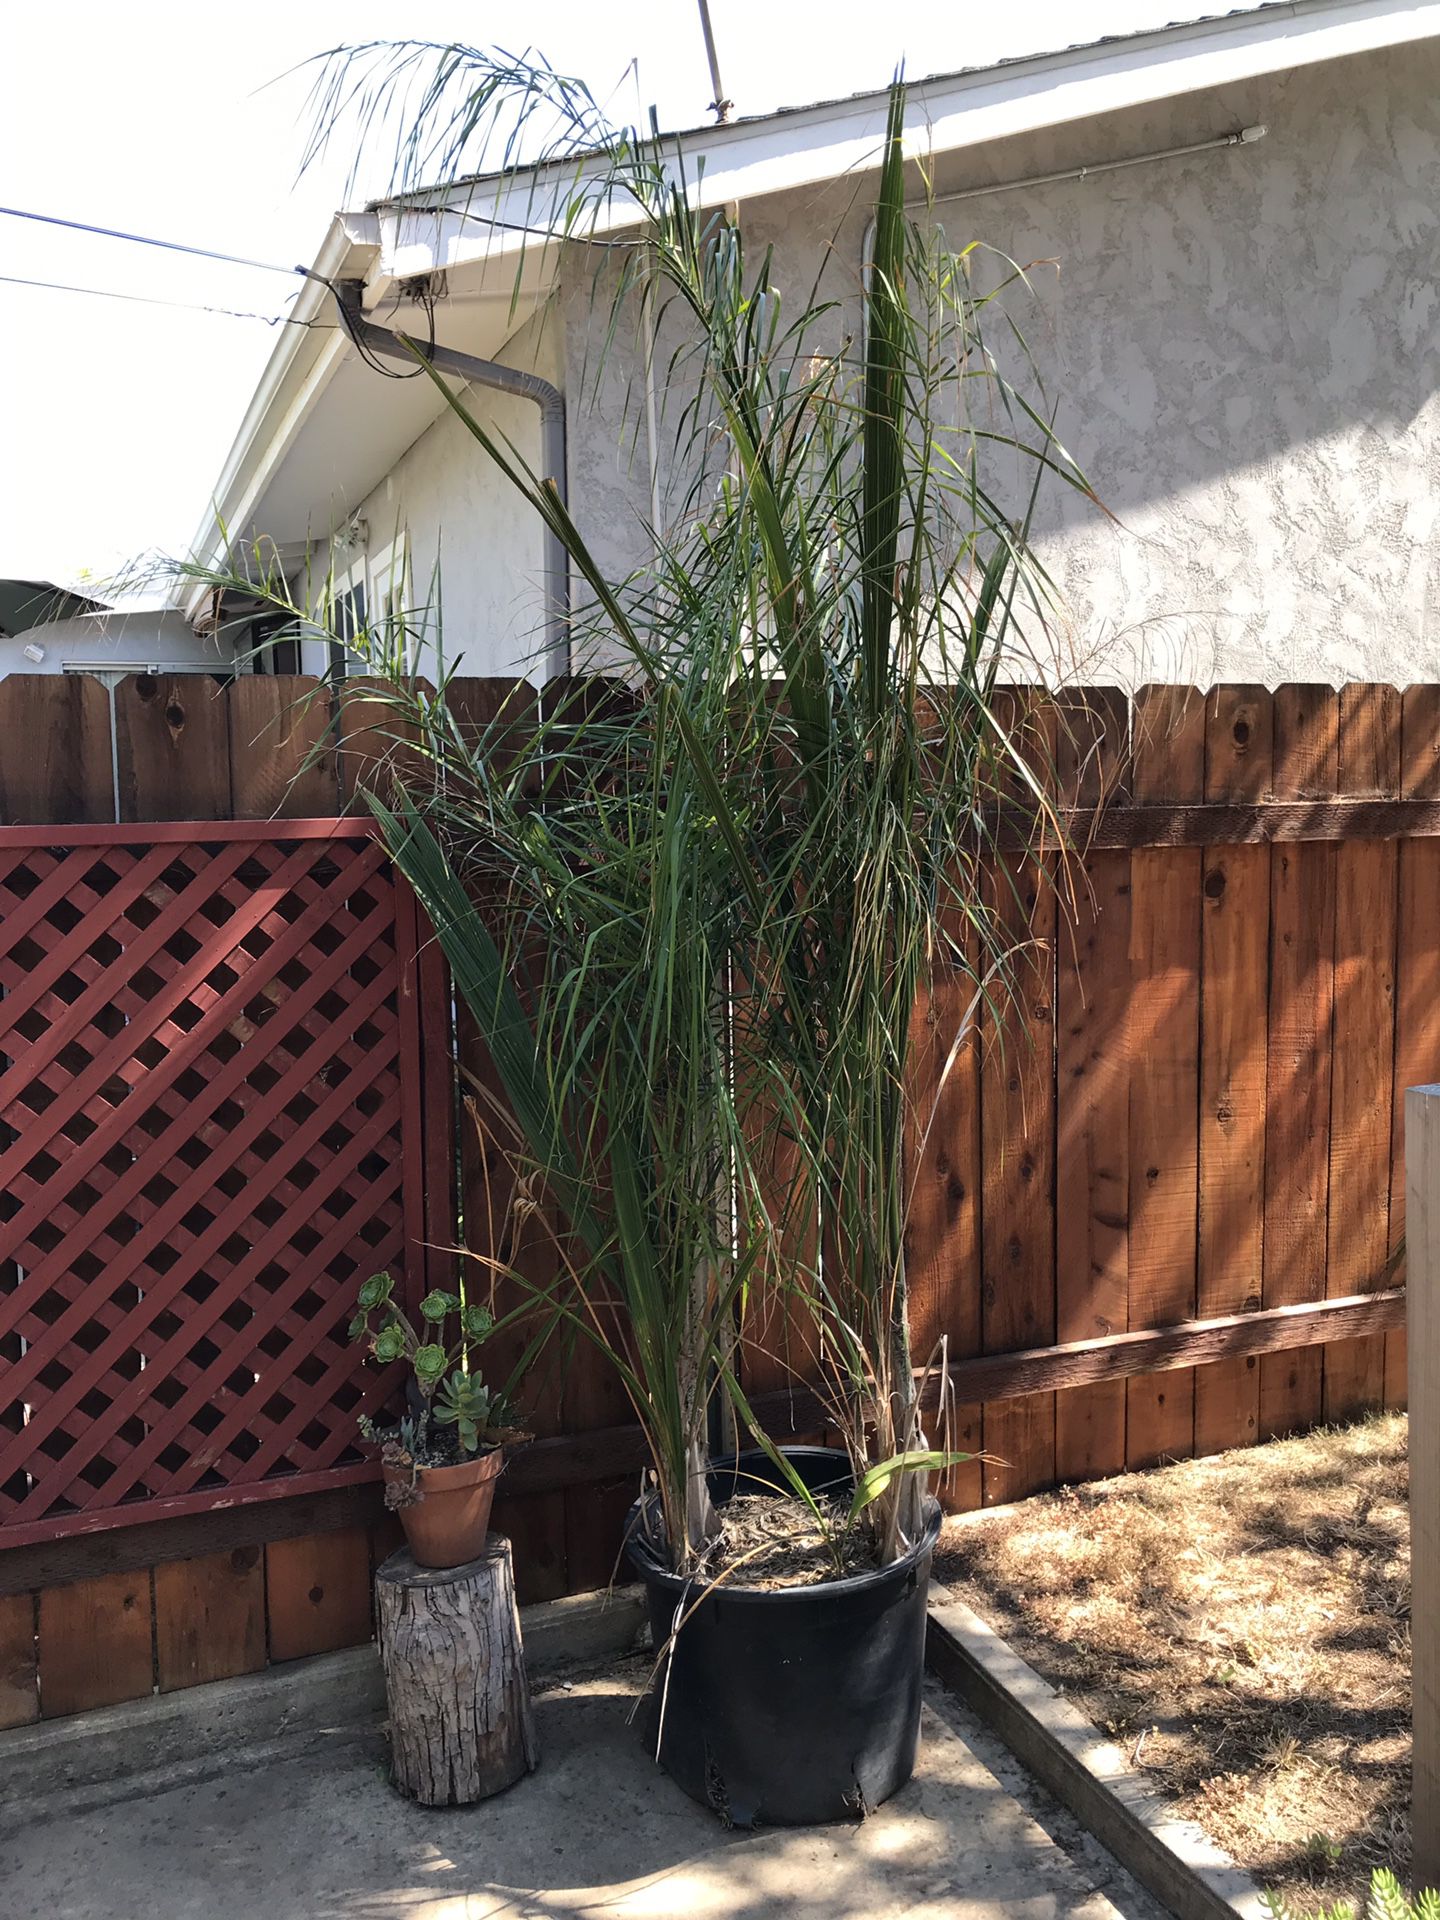 Six queen palm trees in 25 inch pot. At least two are over 5’. All wanting to be planted.